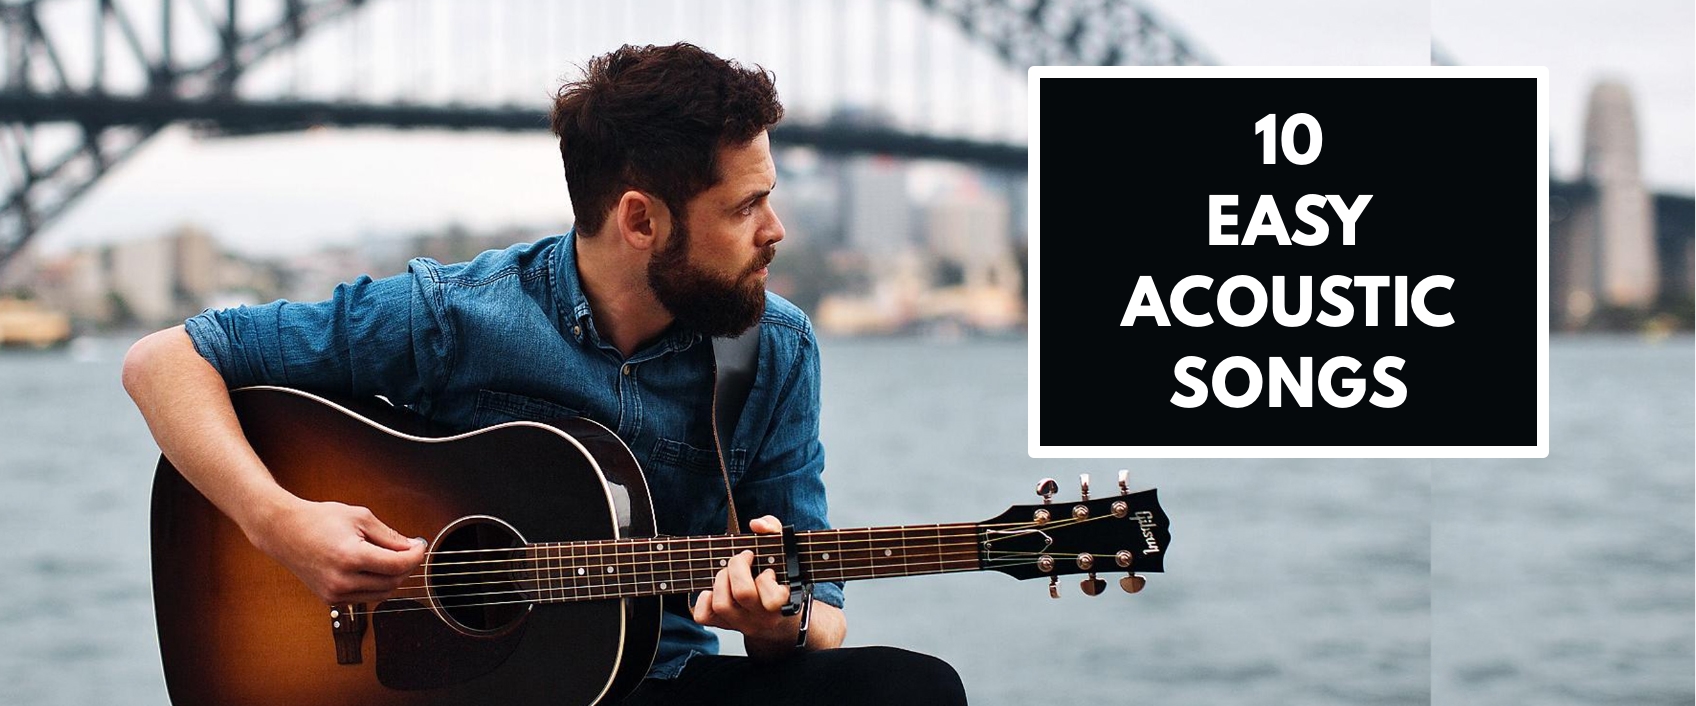 20 amazing acoustic intros with tabs - Guitar Pro Blog - Arobas Music